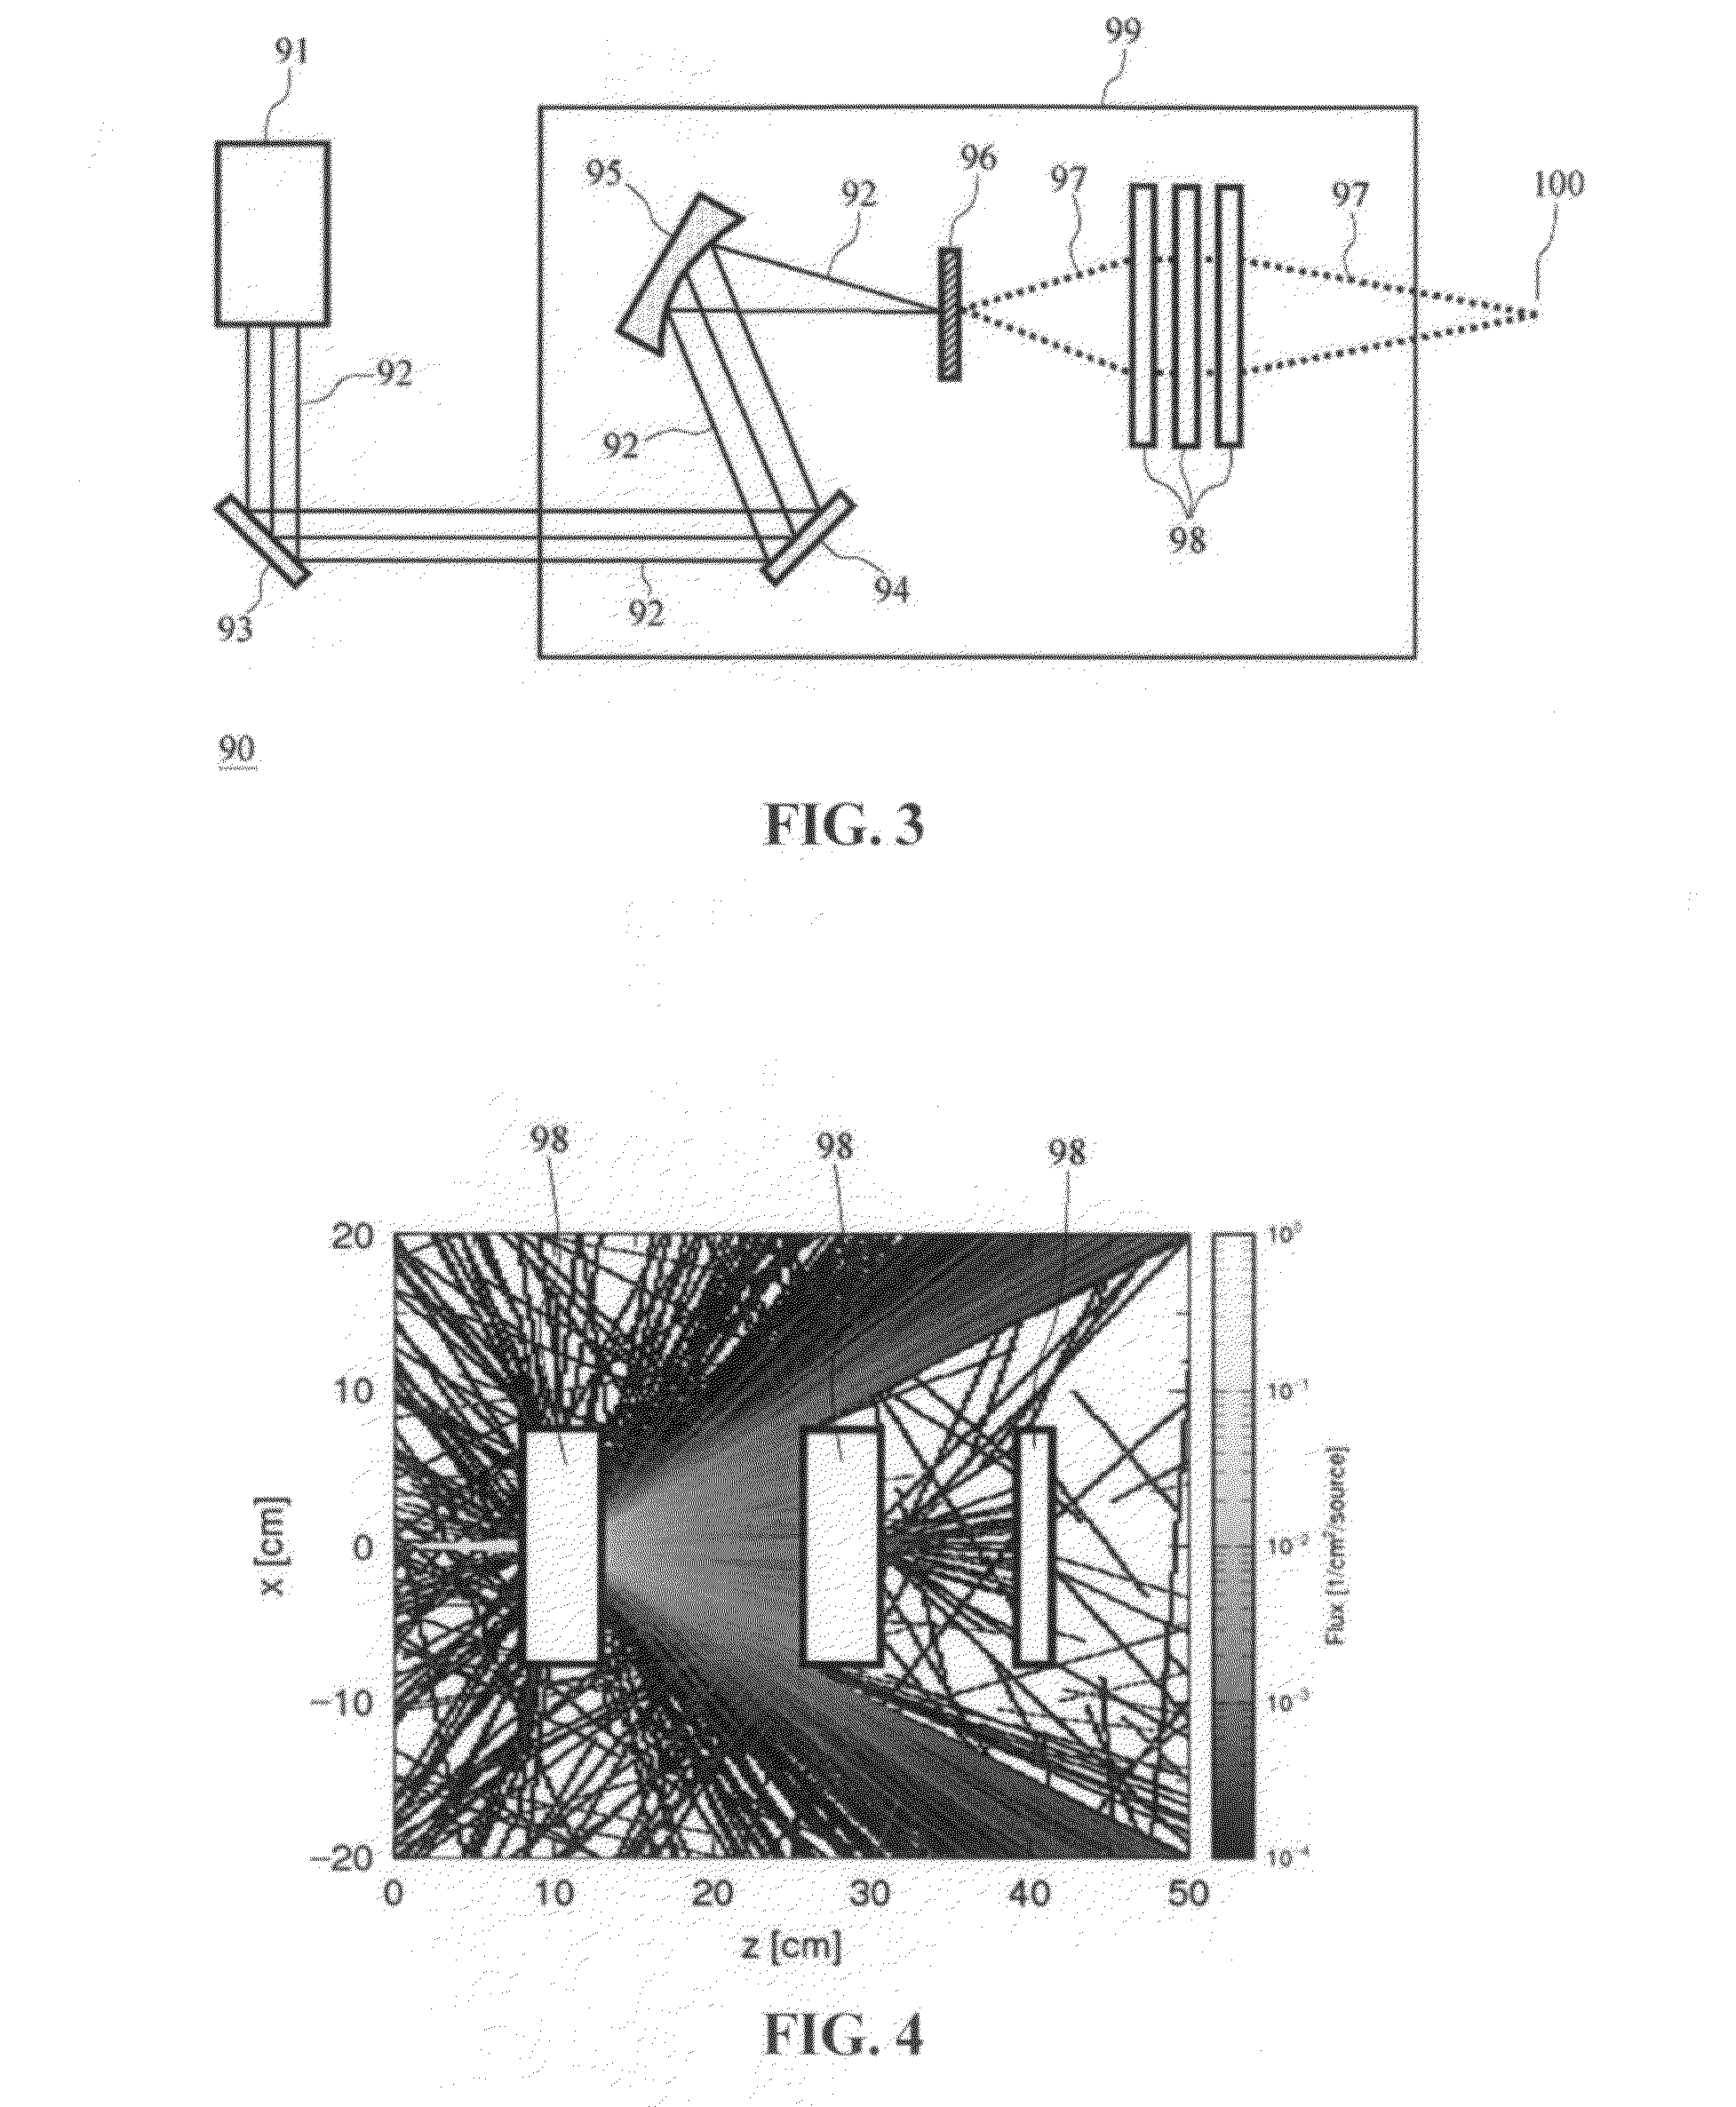 Ion transporter, ion transport method, ion beam irradiator, and medical particle beam irradiator